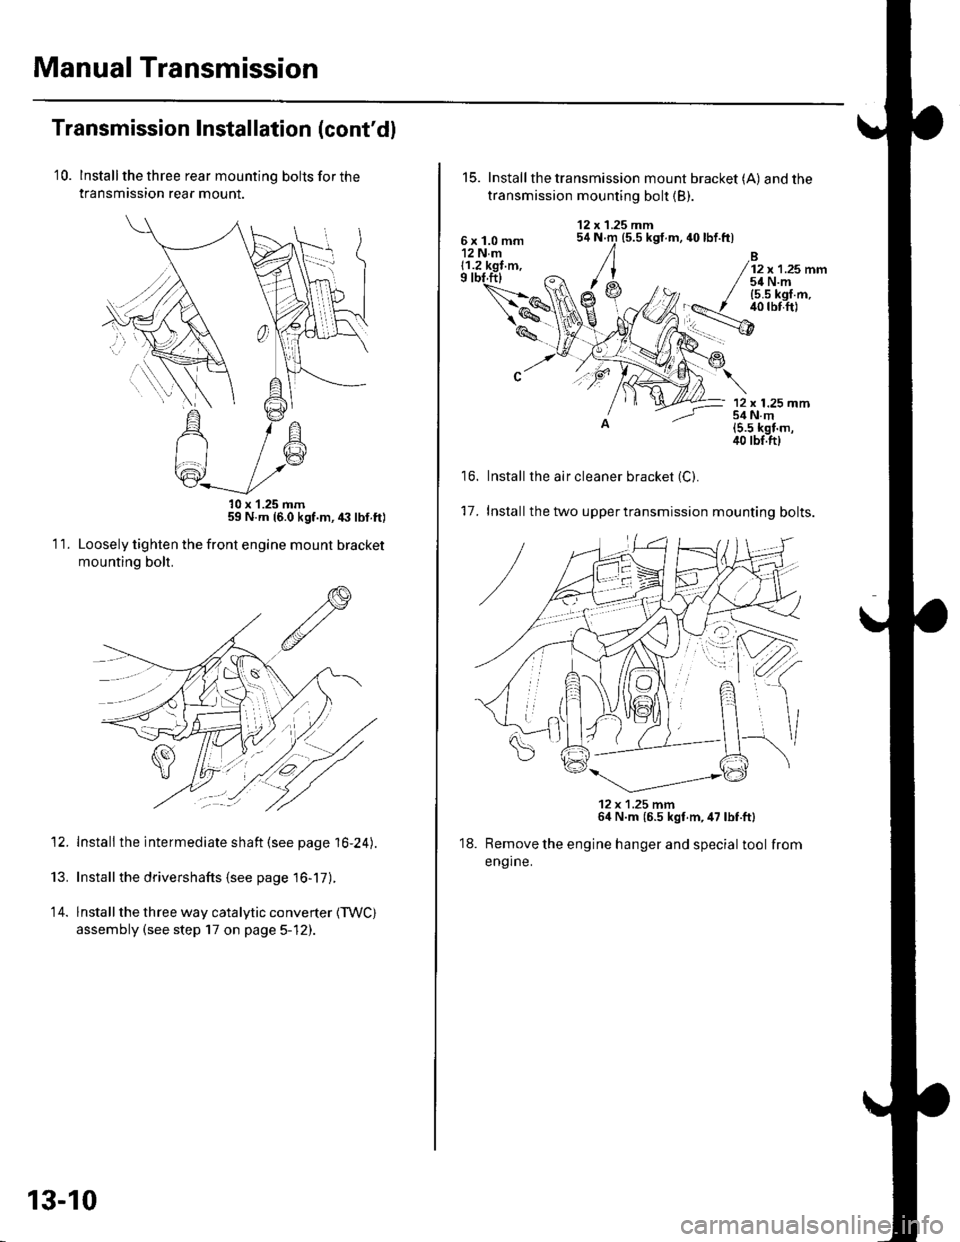 HONDA CIVIC 2002 7.G Owners Guide Manual Transmission
Transmission Installation (contdl
10. Installthe three rear mounting bolls for the
transmission rear mount.
59 N.m (6.0 kgf.m,43 tbf.ft)
Loosely tighten the front engine mount br